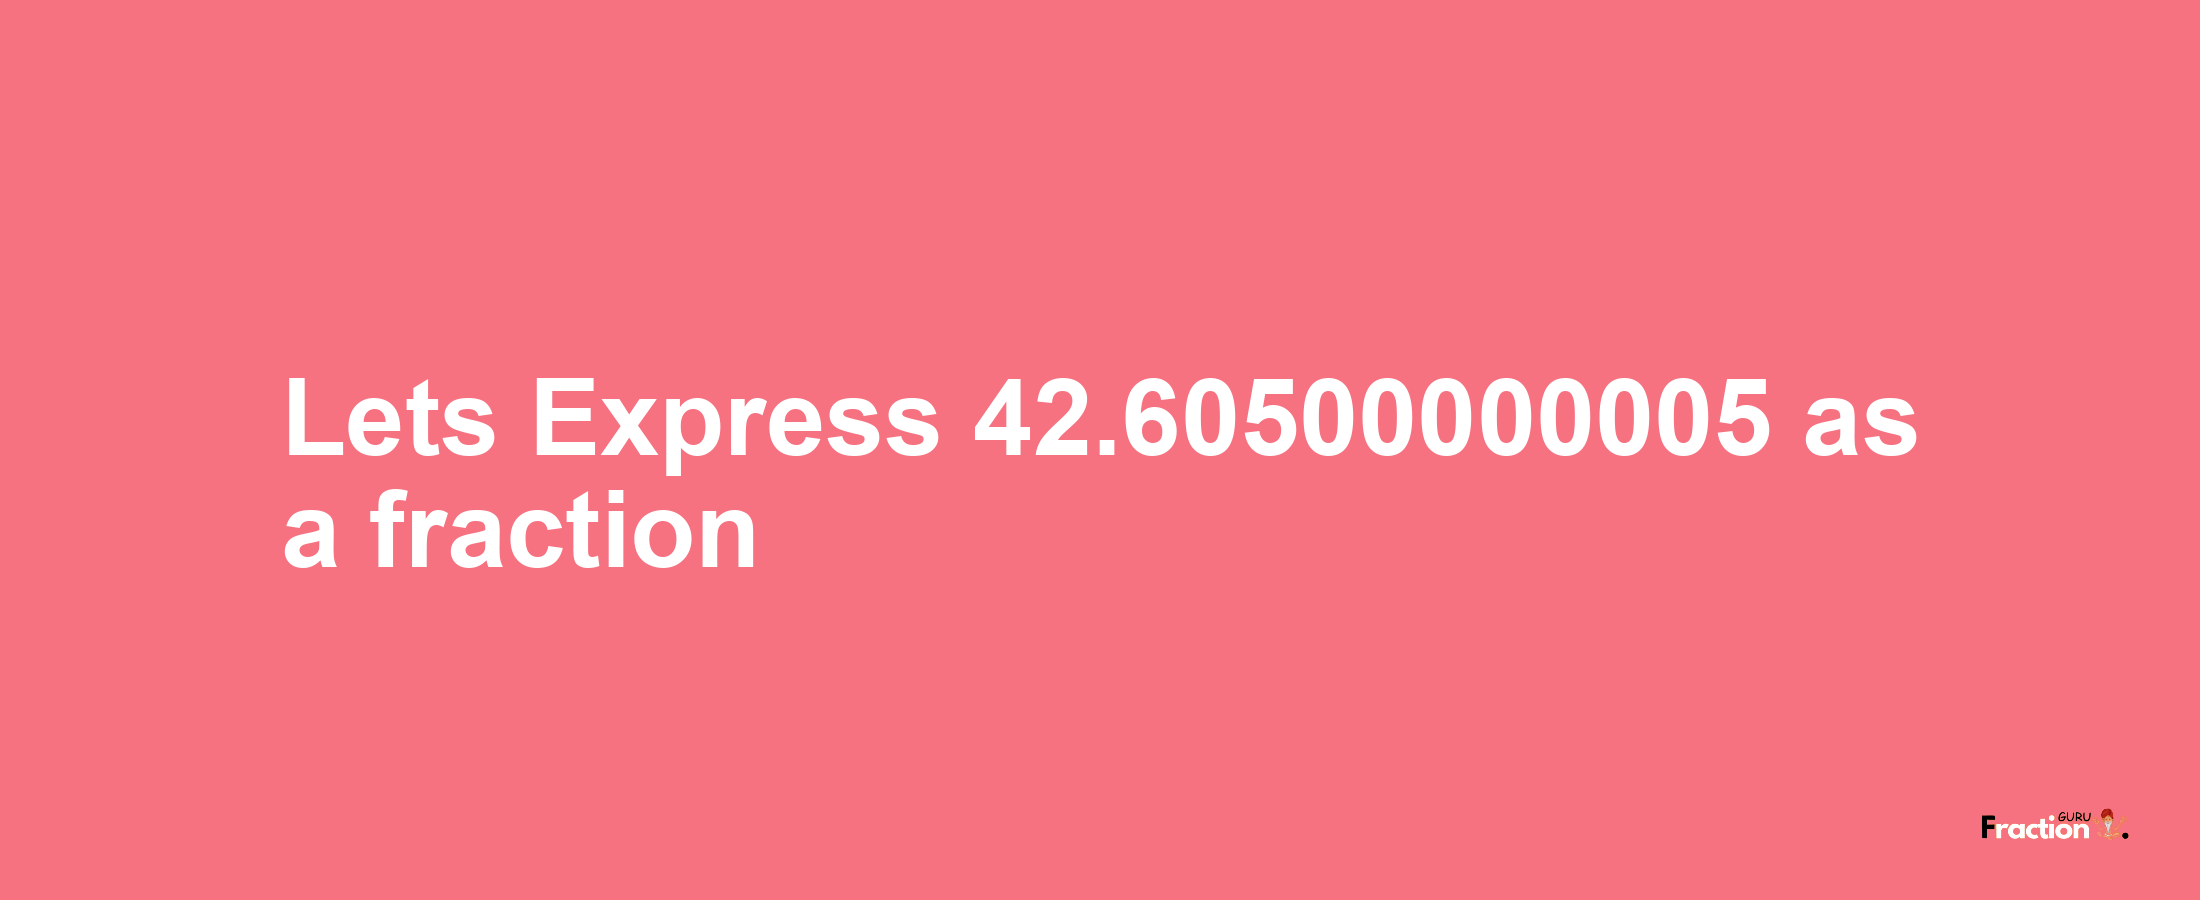 Lets Express 42.60500000005 as afraction